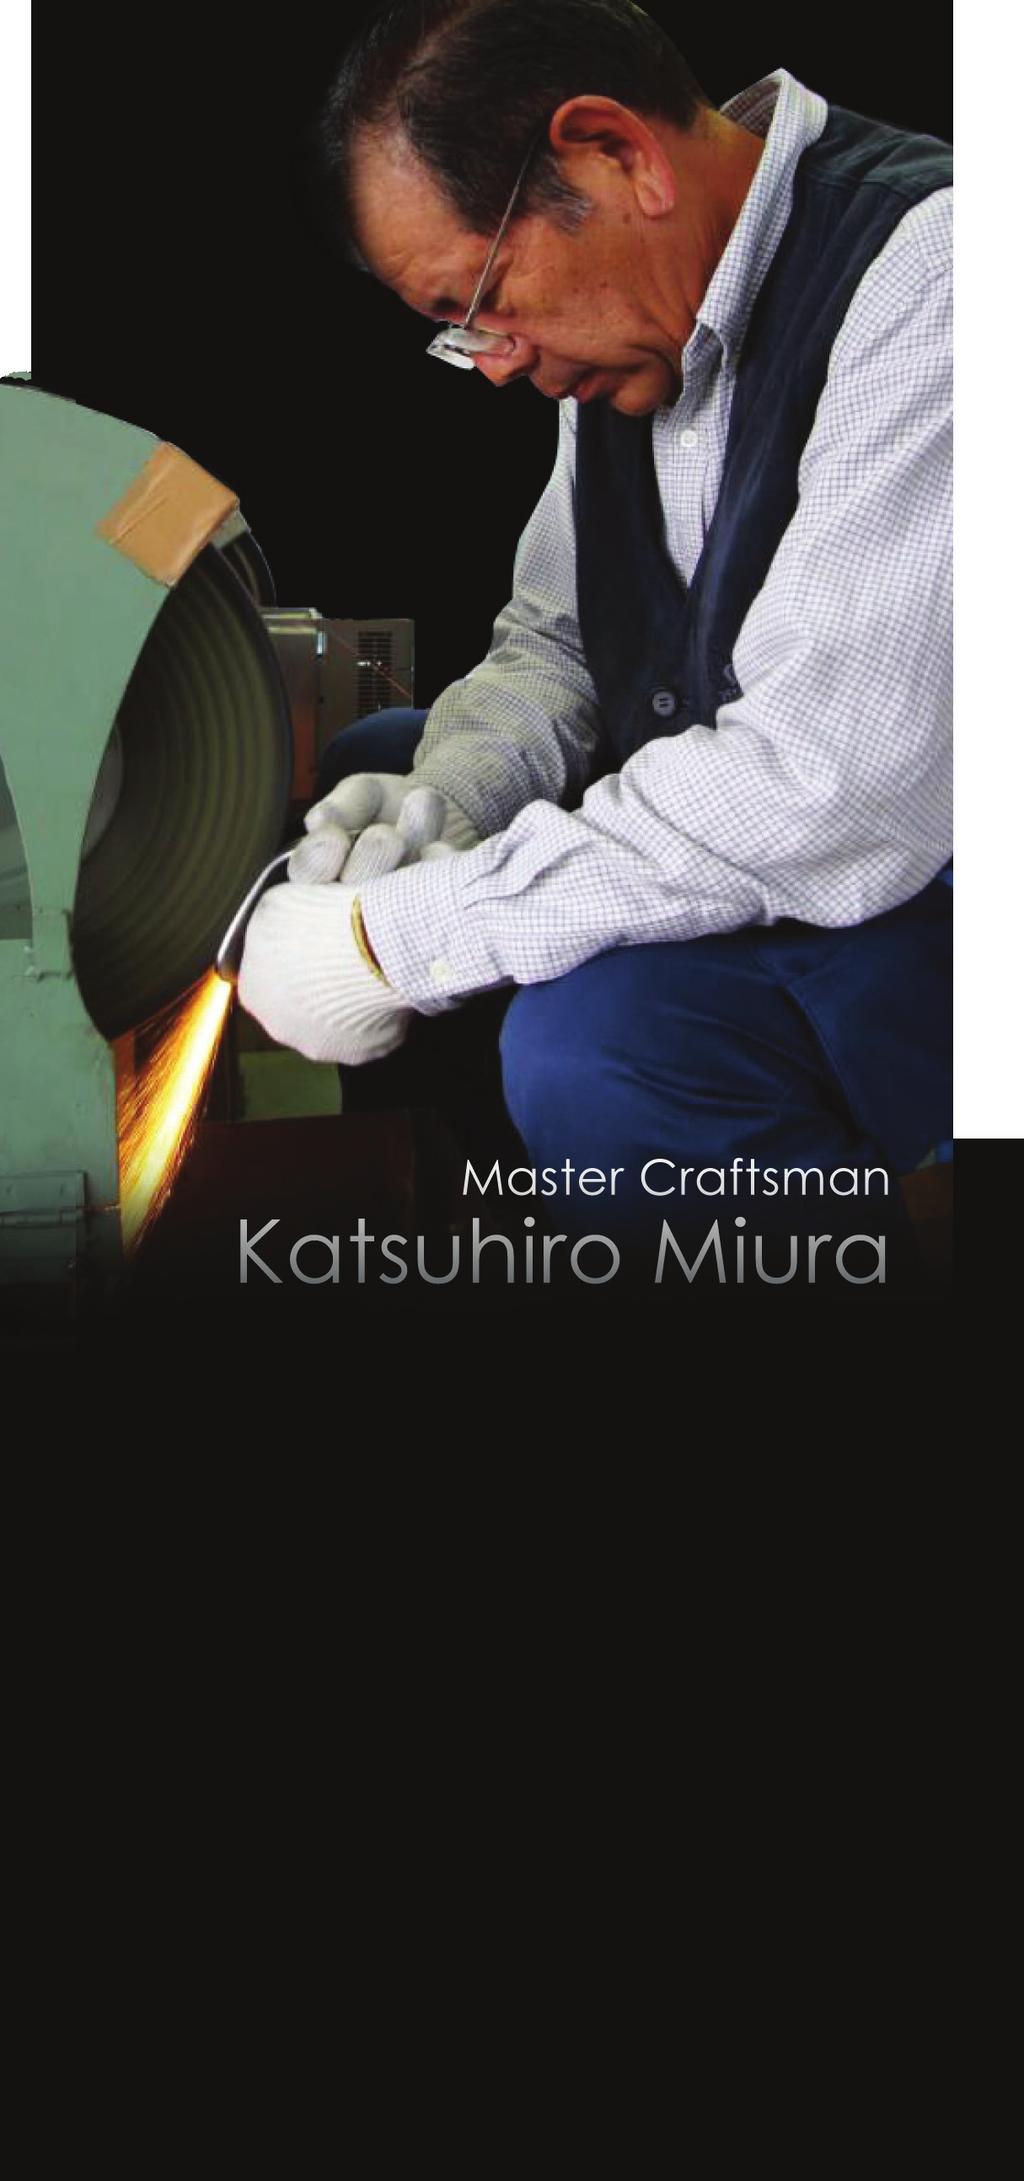 The Golf Club Artistry of Forged Steel In every MIURA golf club, Katsuhiro Miura and his sons combine three lifetimes of skills honed in the steel making heart of Japan, where the samurai came for